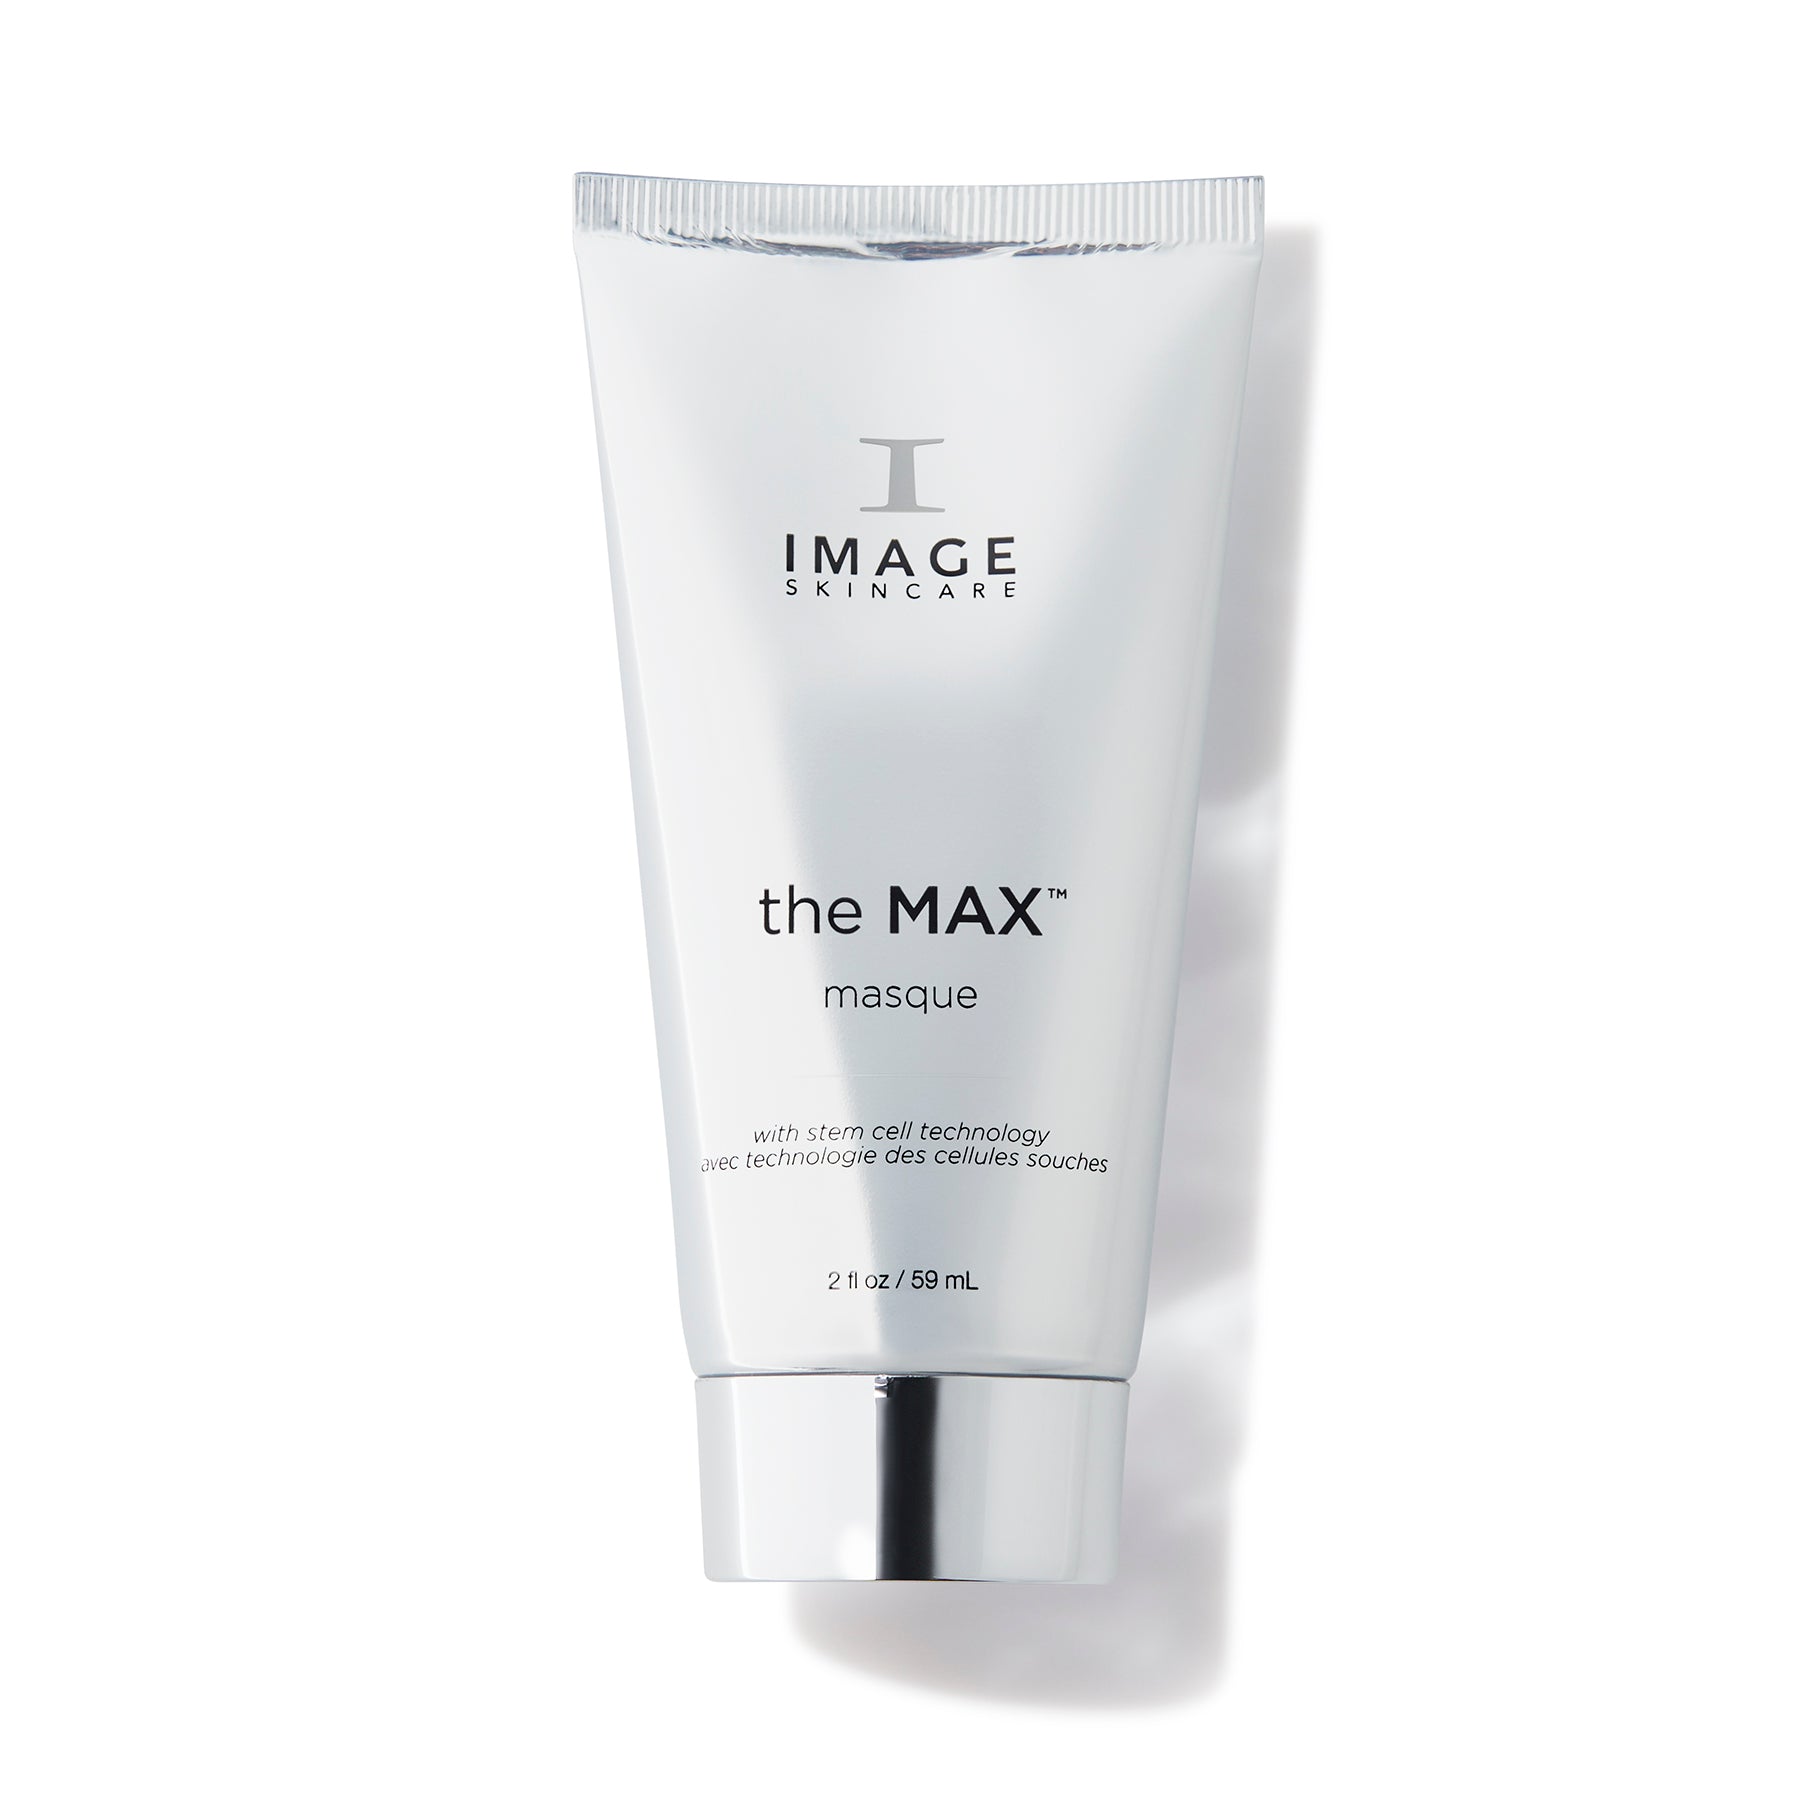 Image Skincare The Max Masque Shop At Exclusive Beauty